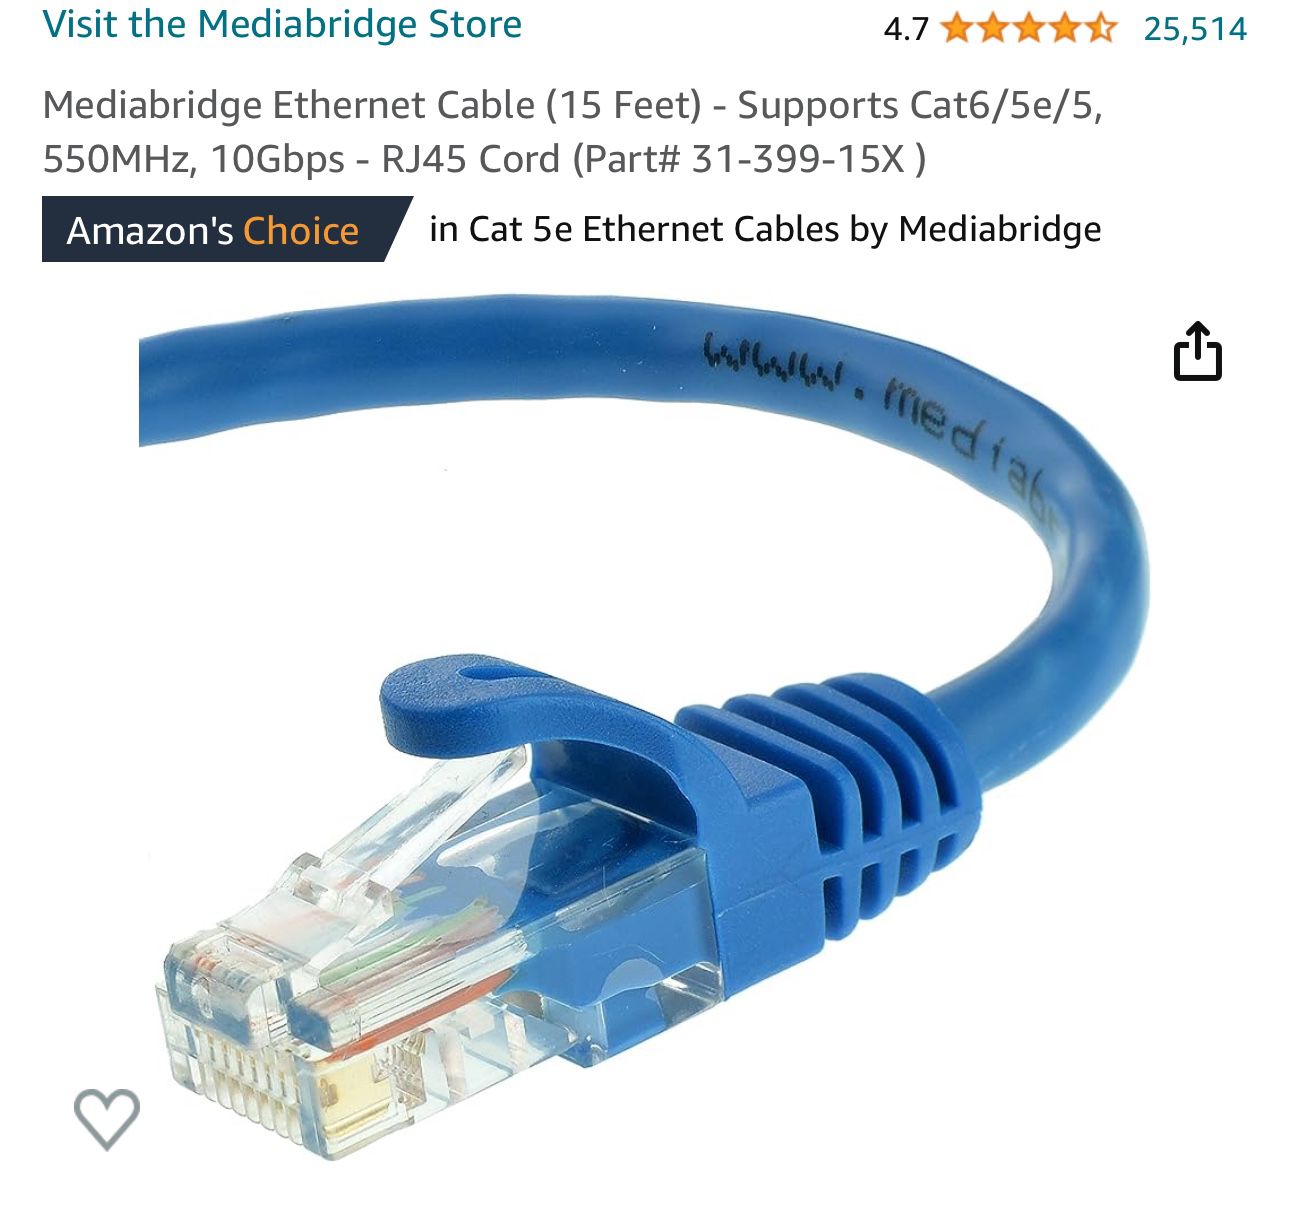 Mediabridge™ Ethernet Cable (15 Feet) - Supports Cat6 / Cat5e / Cat5 Standards, 550MHz, 10Gbps - RJ45 Computer Networking Cord (Part# 31-399-15X)